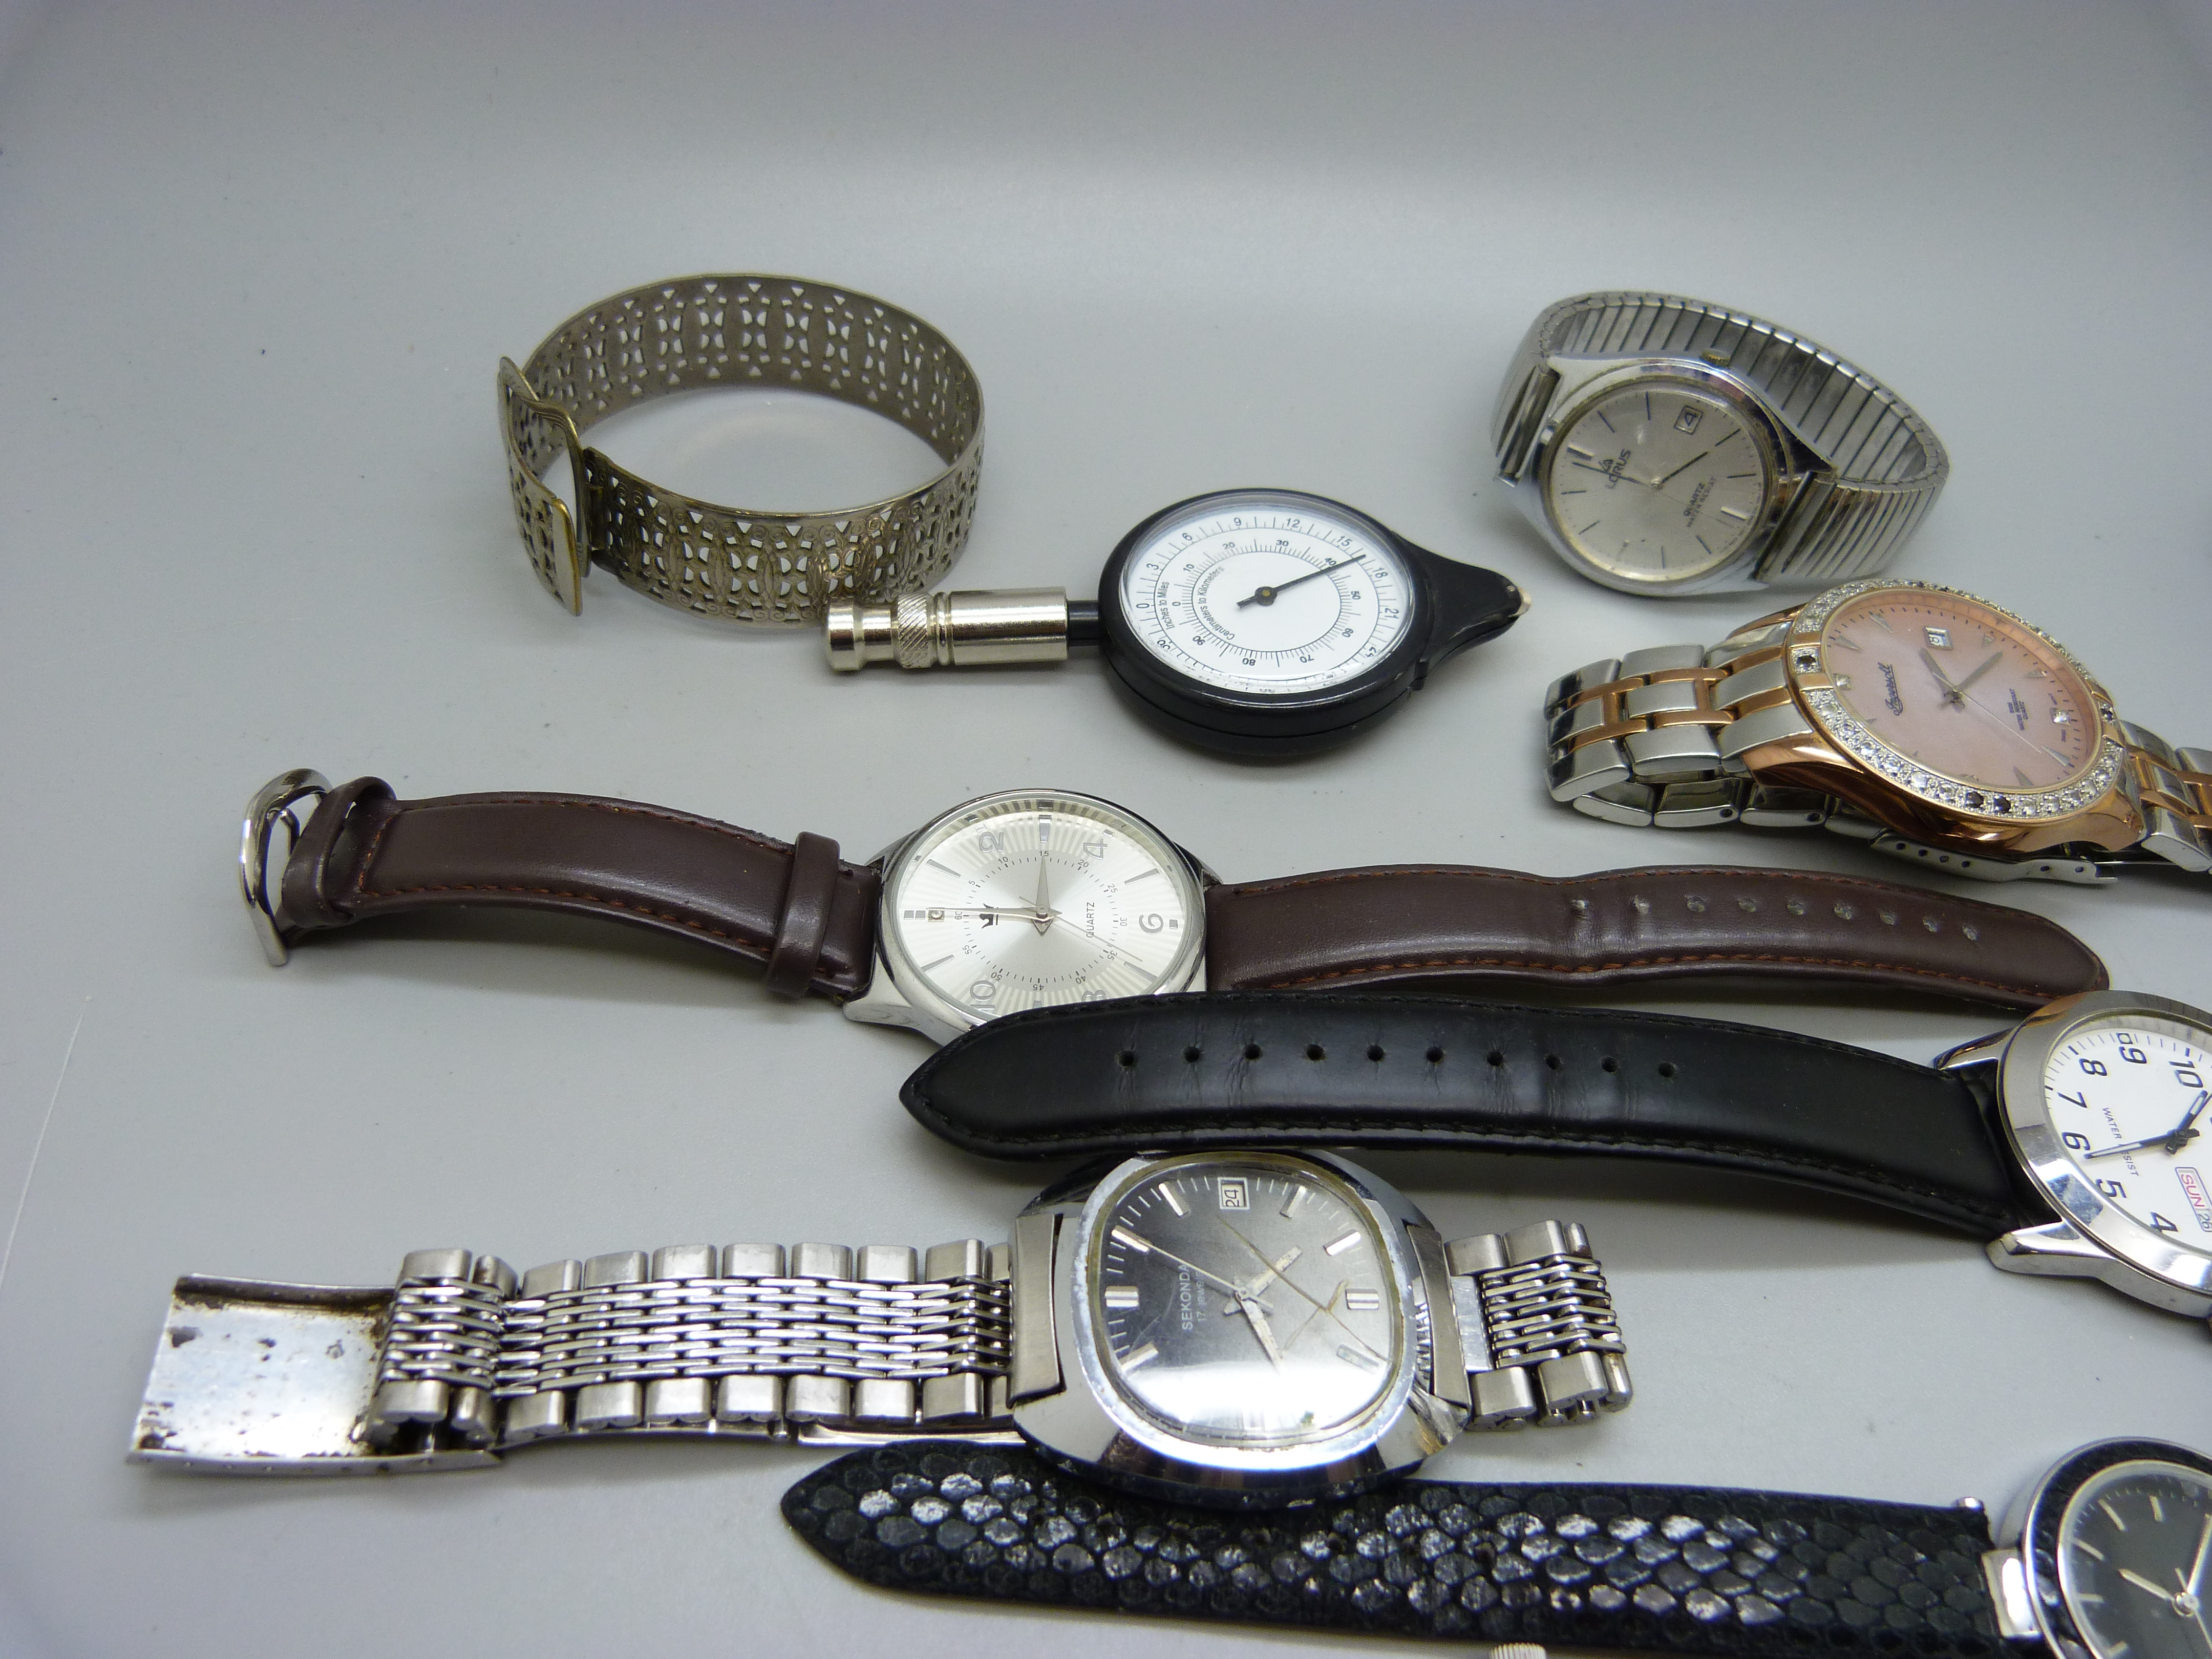 Lady's and gentleman's wristwatches including Sekonda, Ingersoll and Fossil - Image 3 of 4